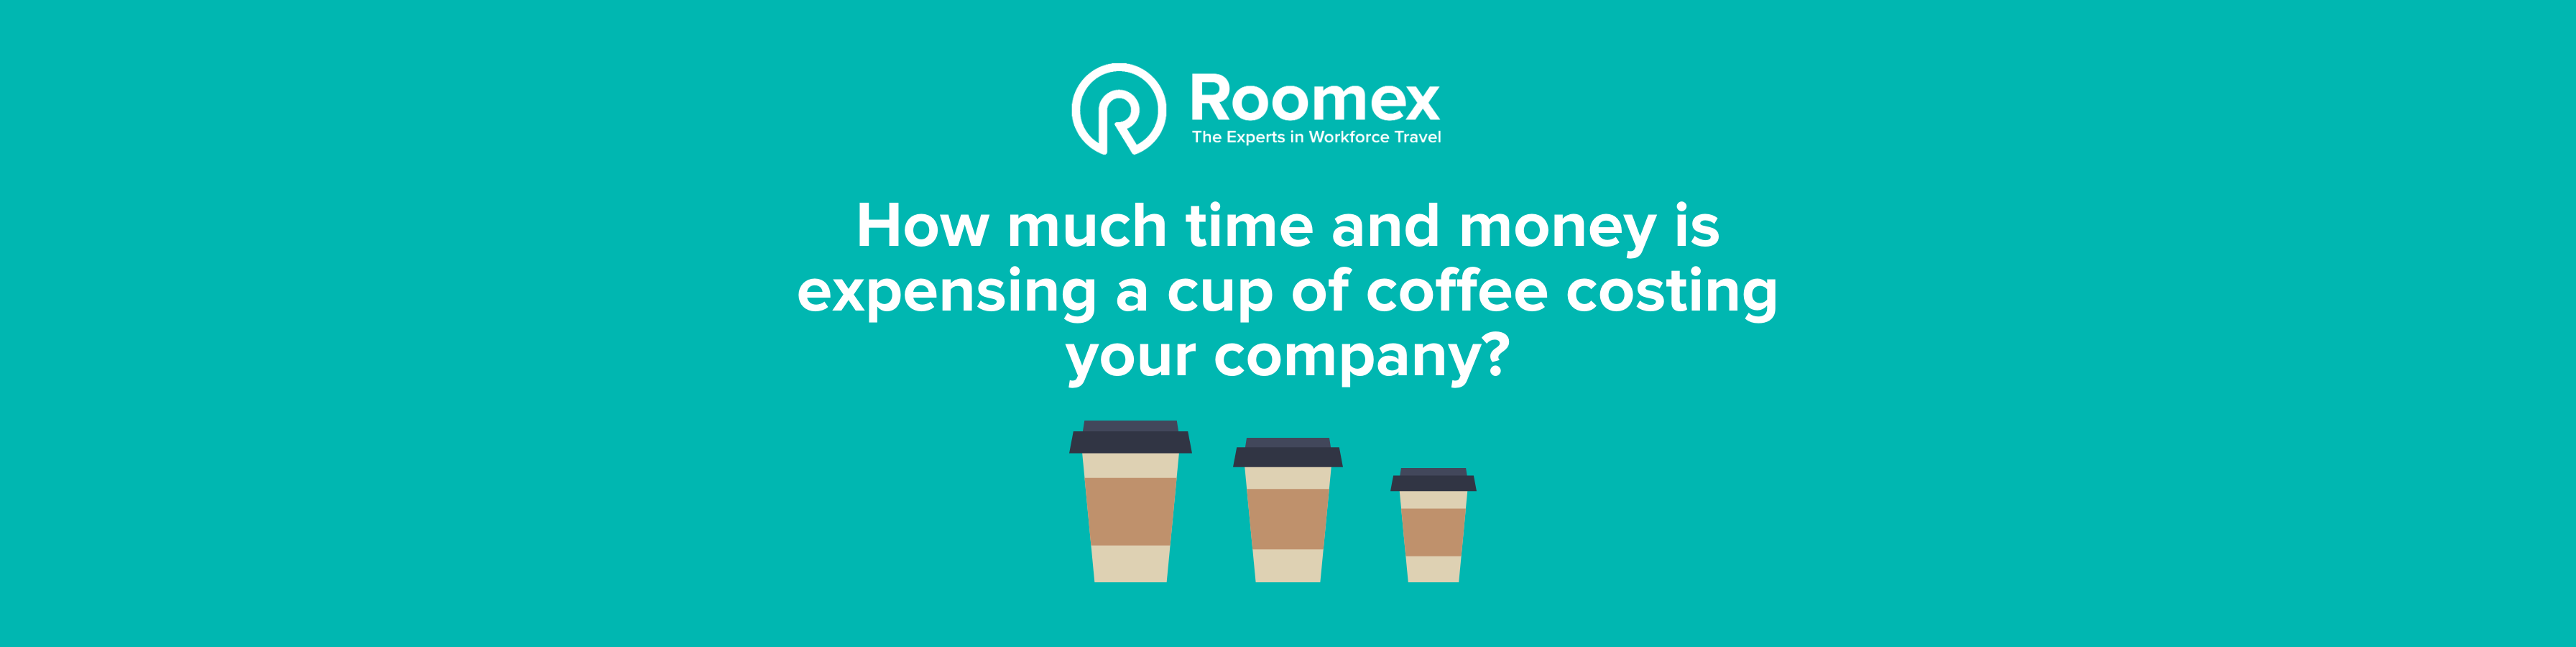 Can expensing a coffee really cost your company £45,120 every year?